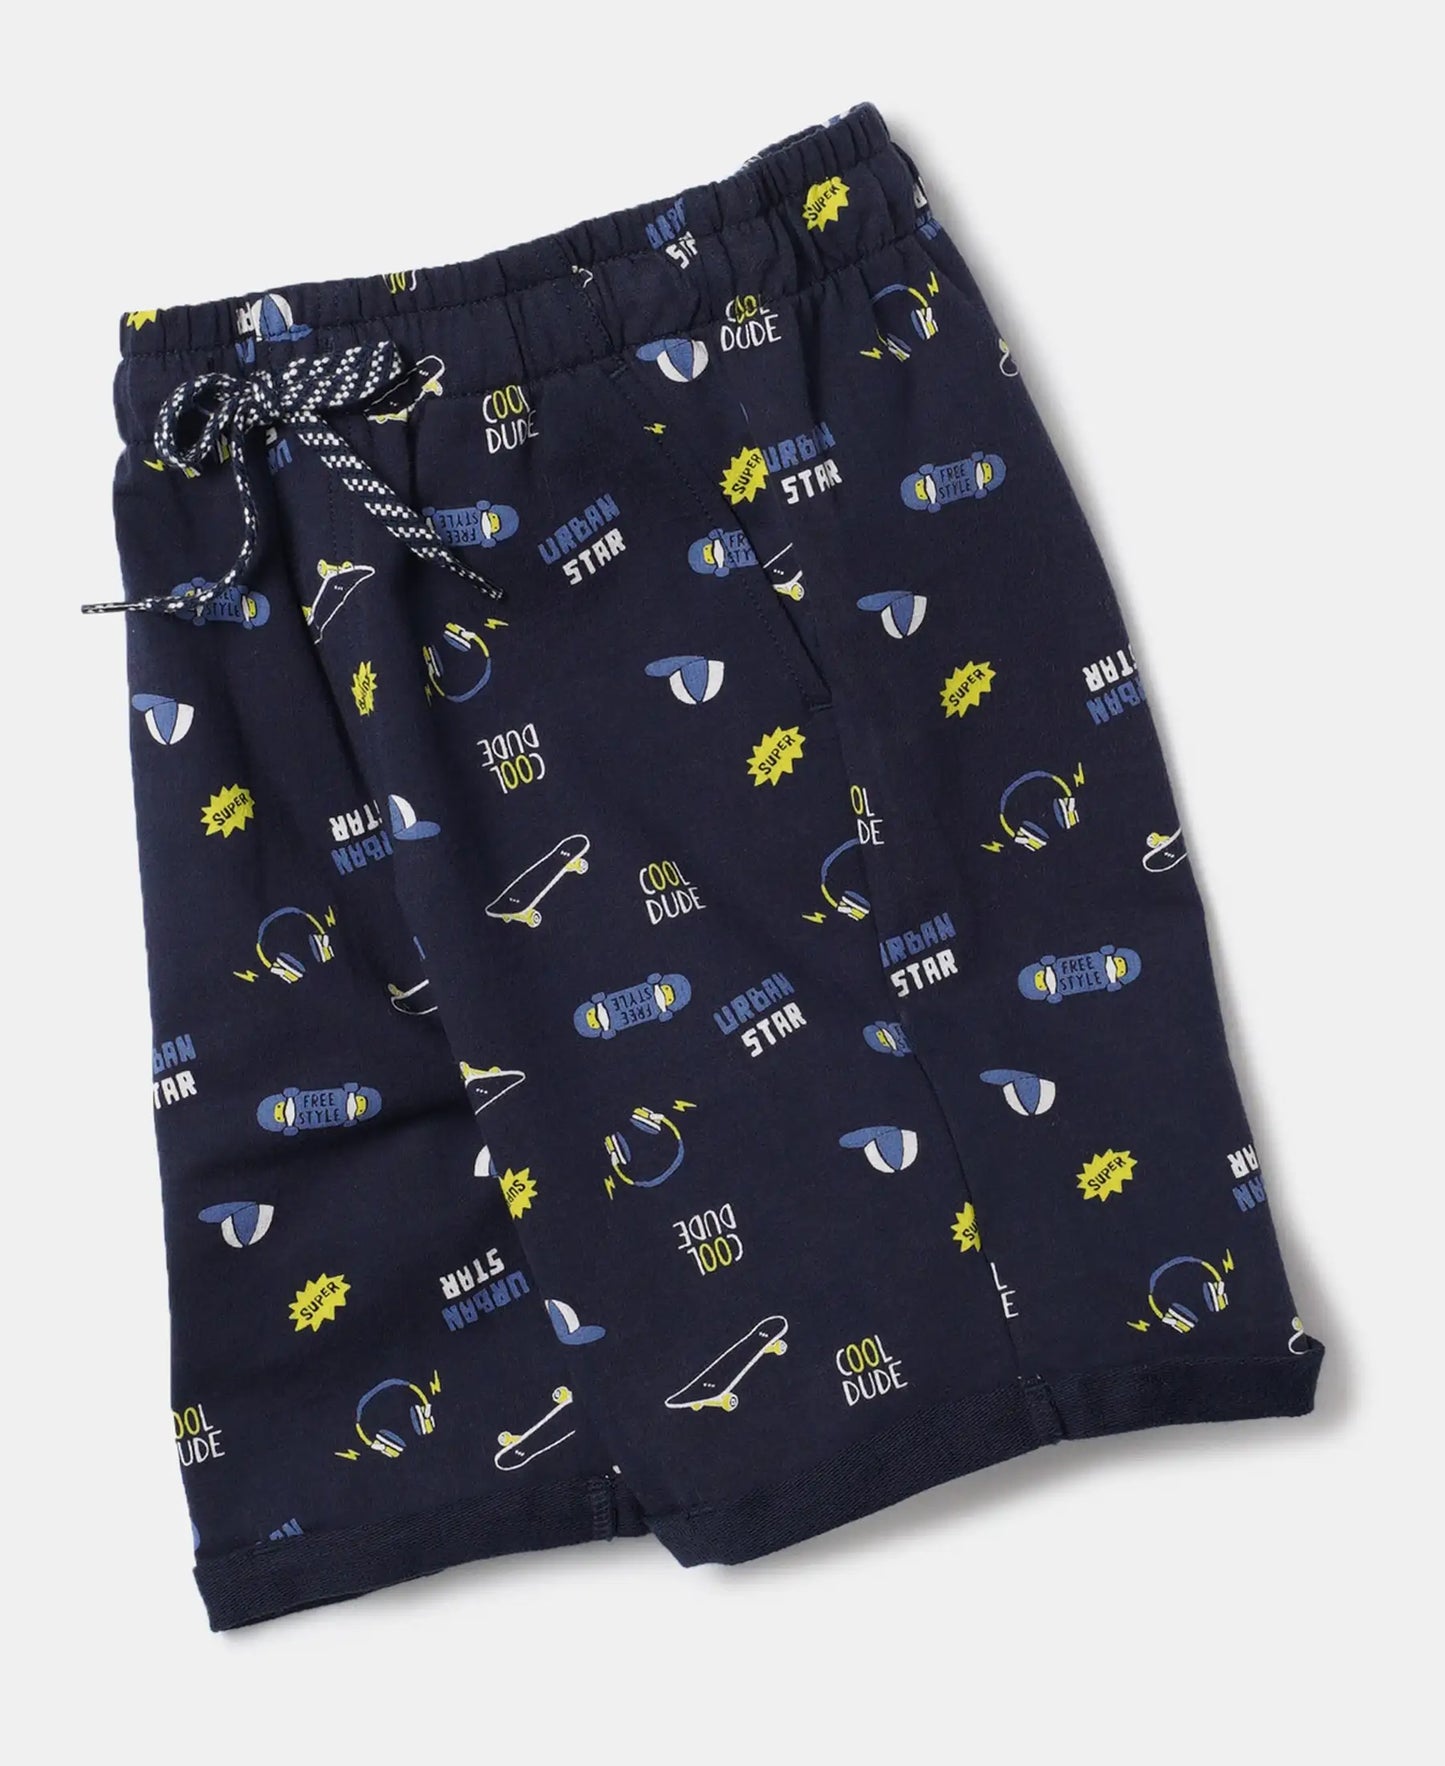 Super Combed Cotton French Terry Printed Shorts with Turn Up Hem Styling - Navy Printed-6